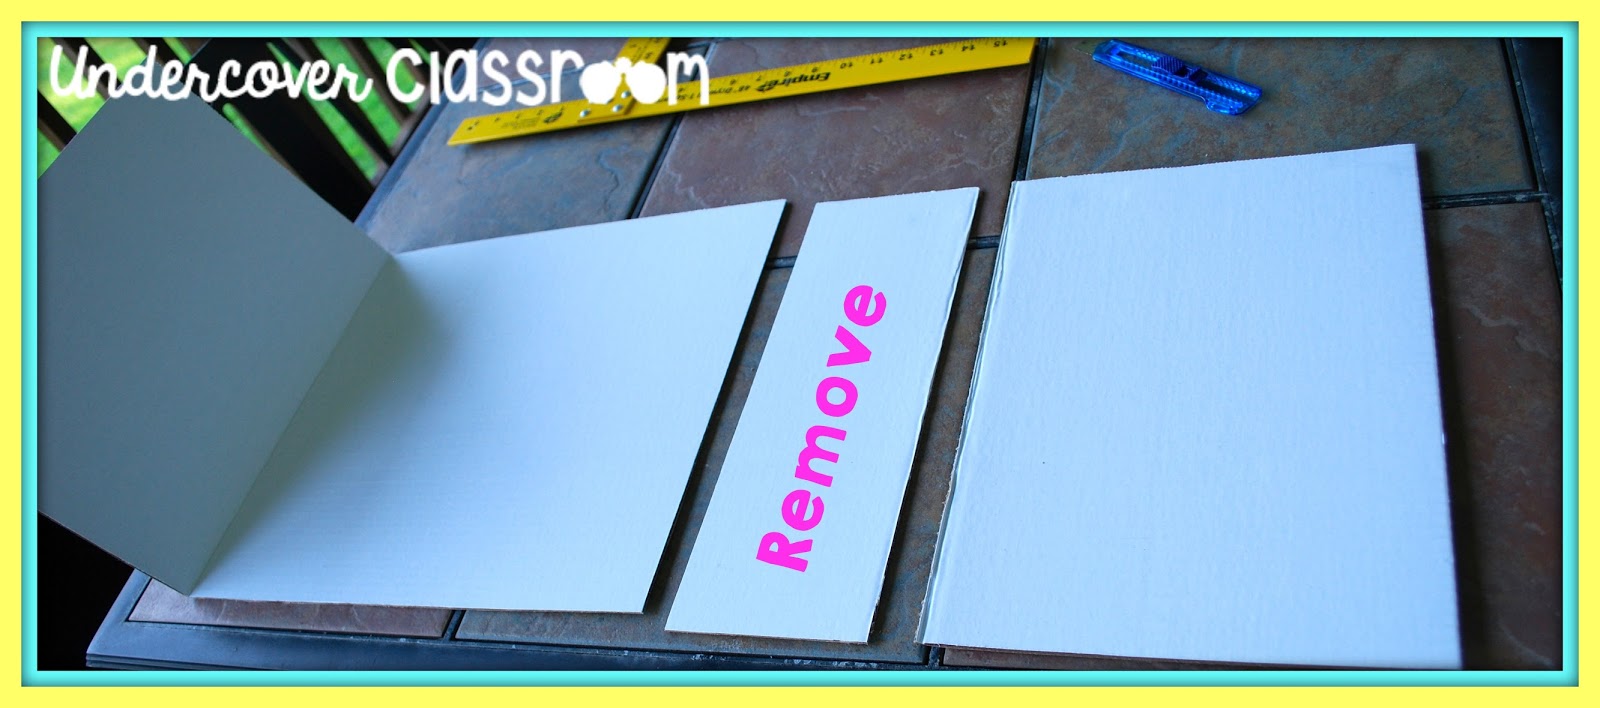 Save money by making privacy folders out of display boards from the dollar store. This step by step tutorial will show you how.